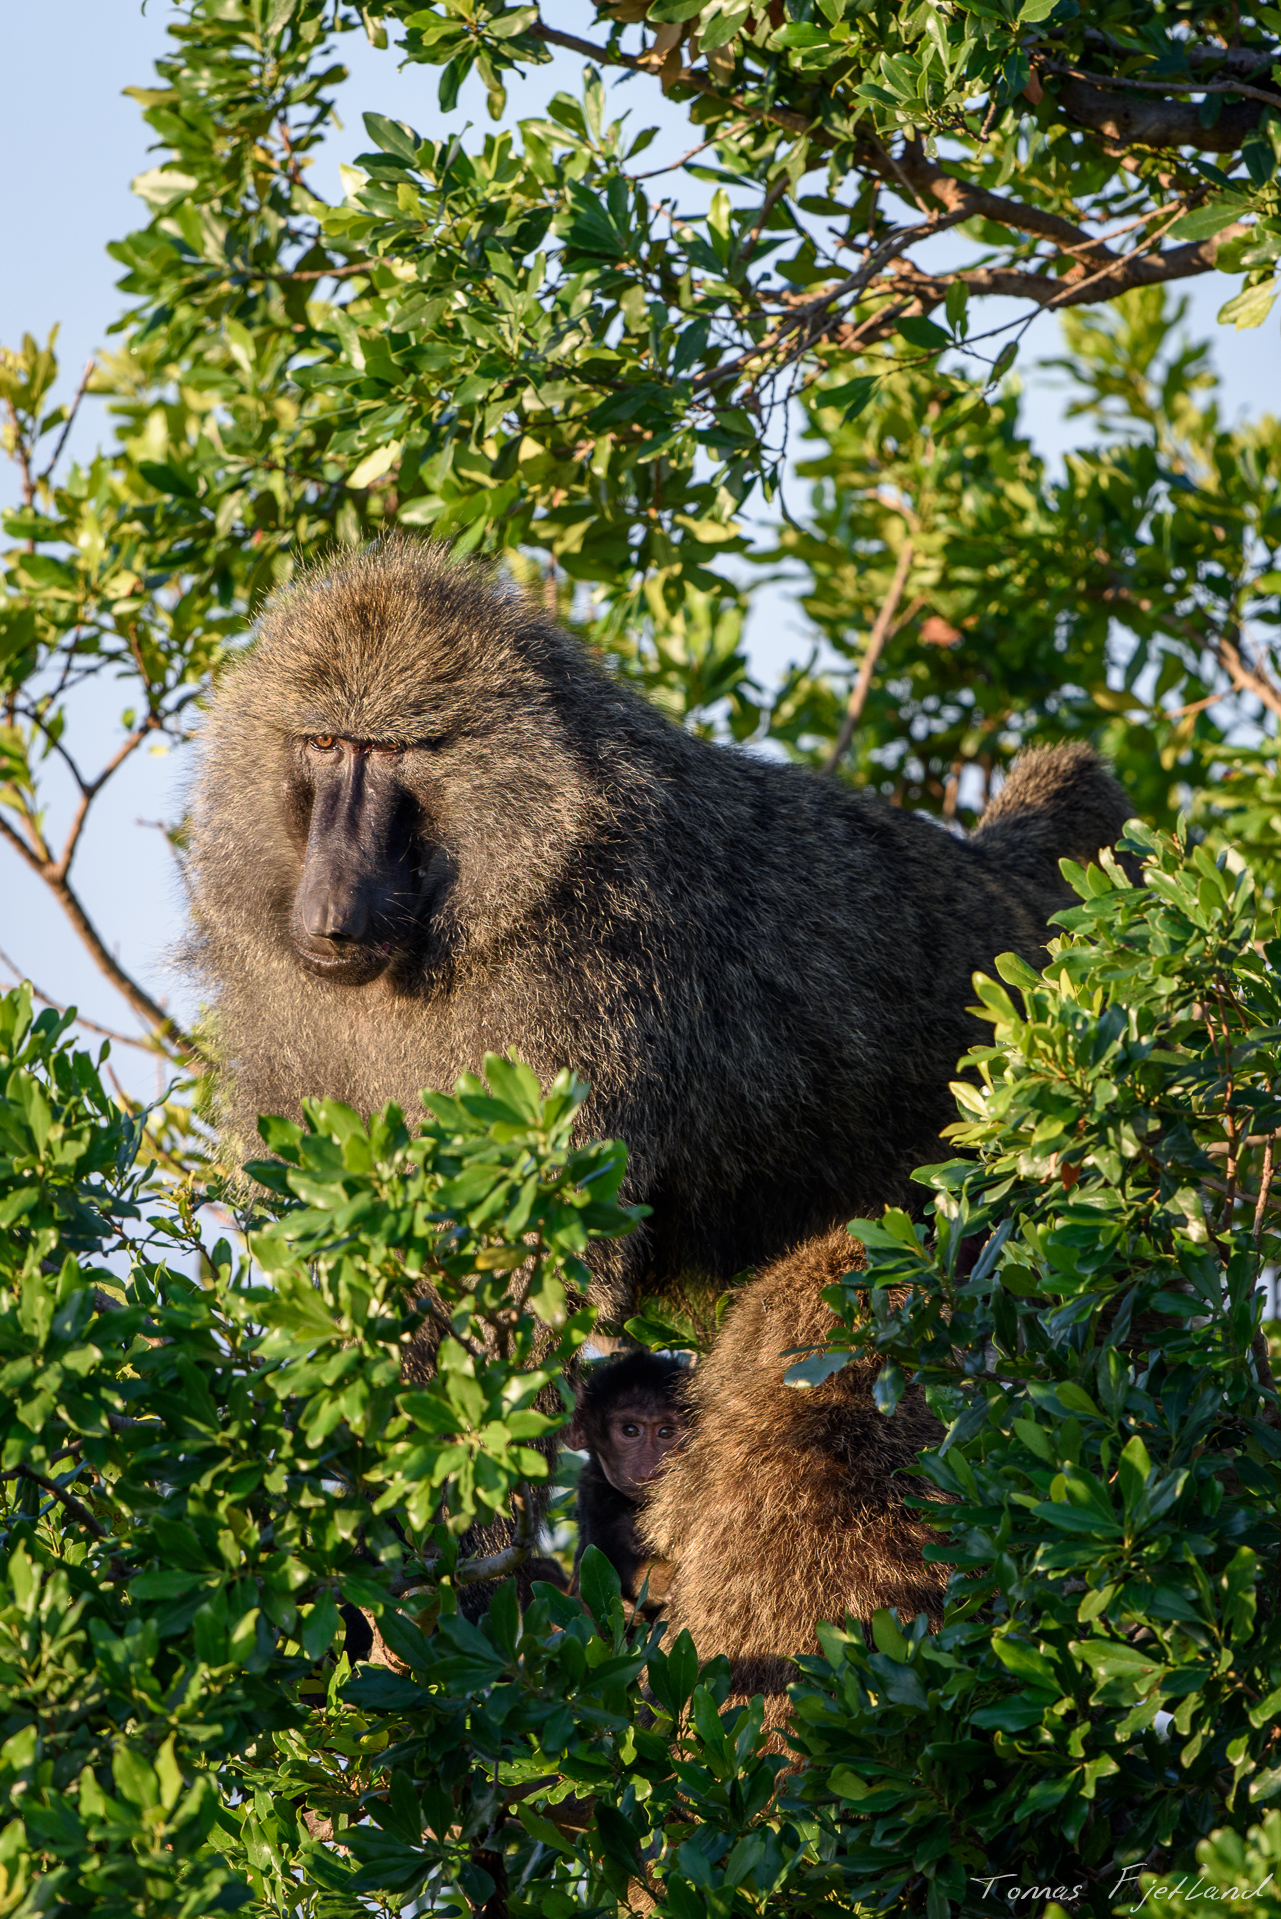 The little baby baboon is well protected by its mother and the dominent male as the group have settled in trees above the hippo pools.